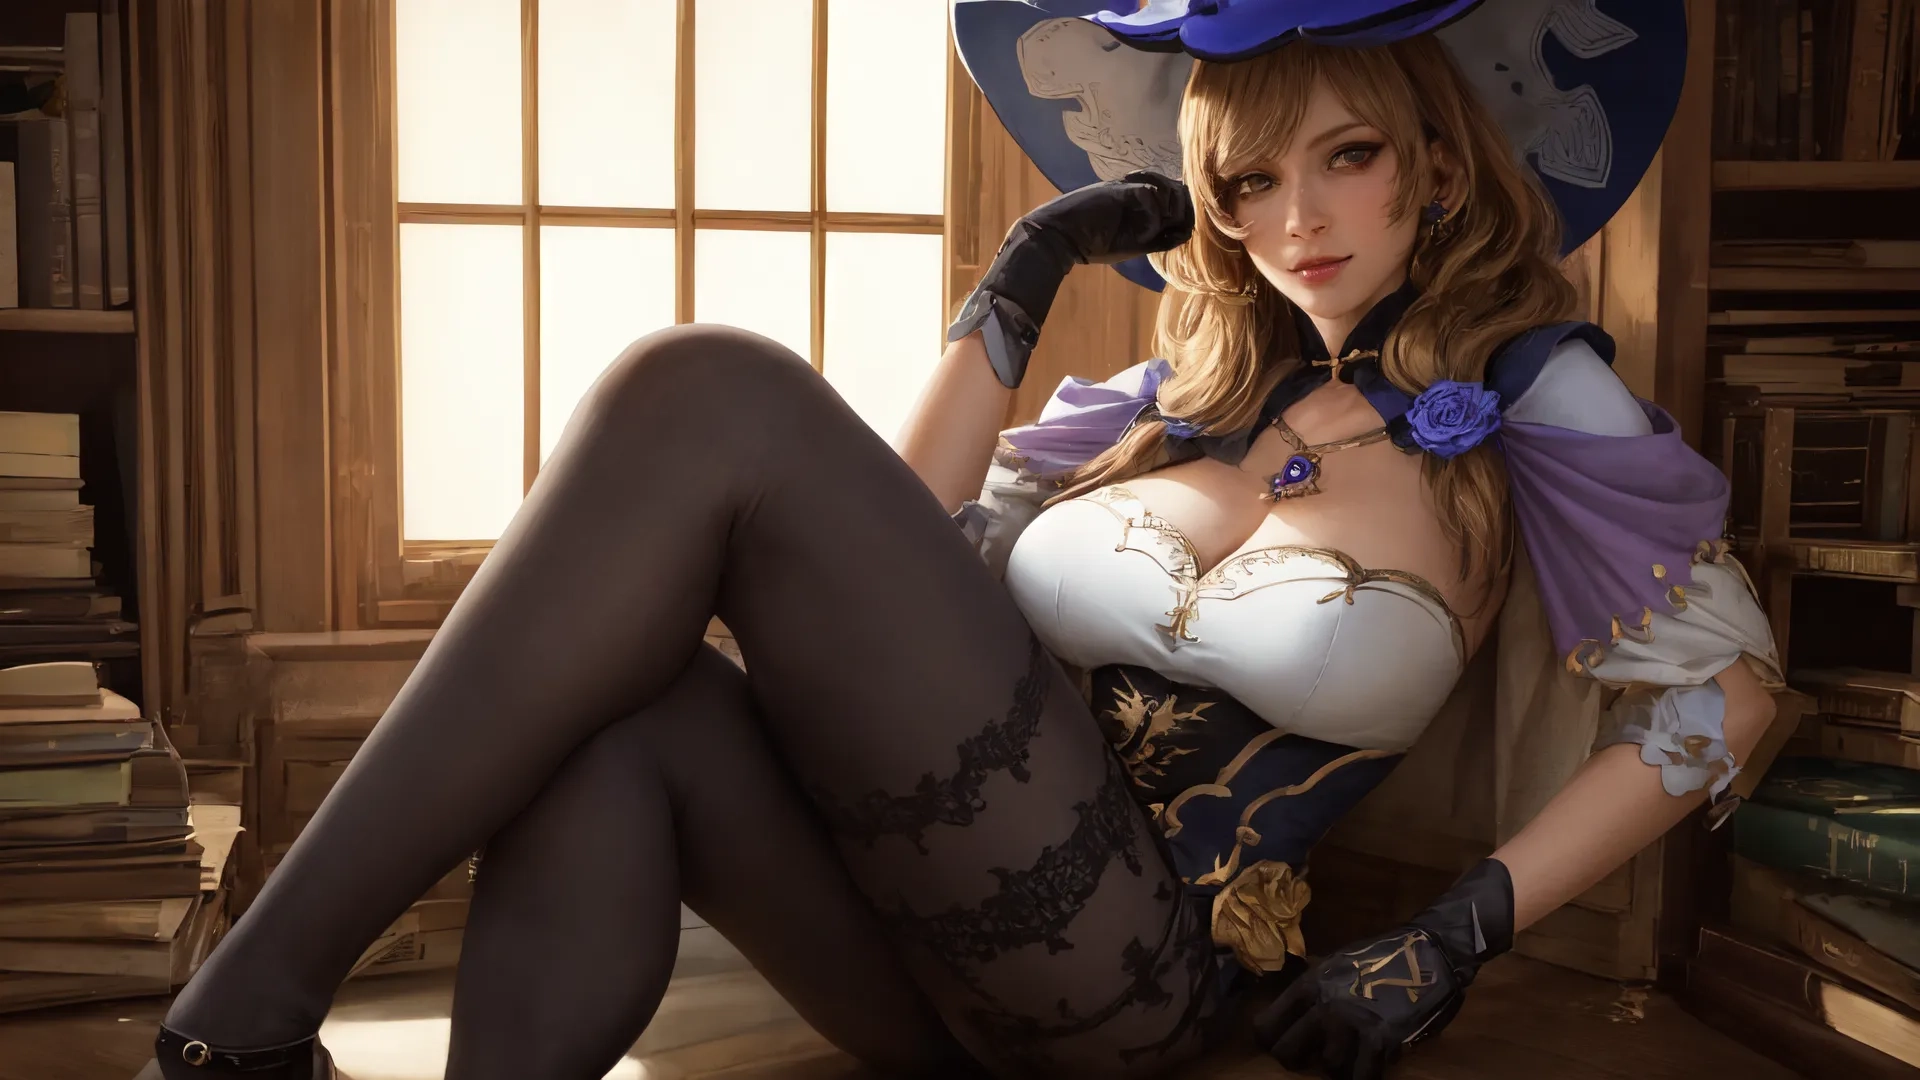 this young lady dressed like a witch is sitting in the window sill posing for a photograph with her hat and stockings on it's legs
